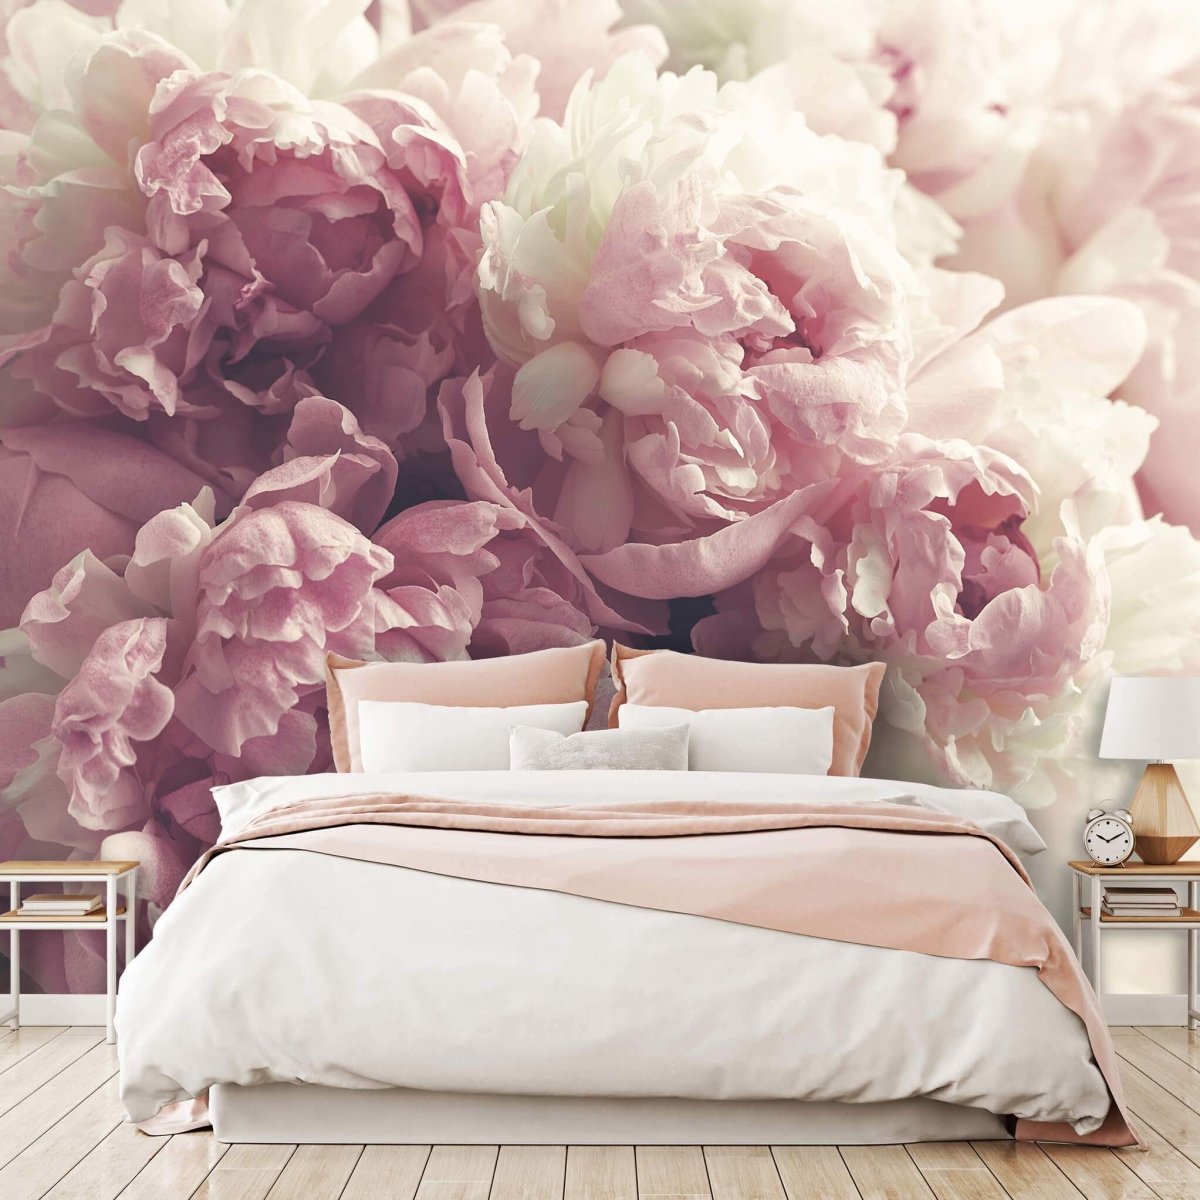 Photo wallpaper flowers a ✓ For living of ▻ feeling great